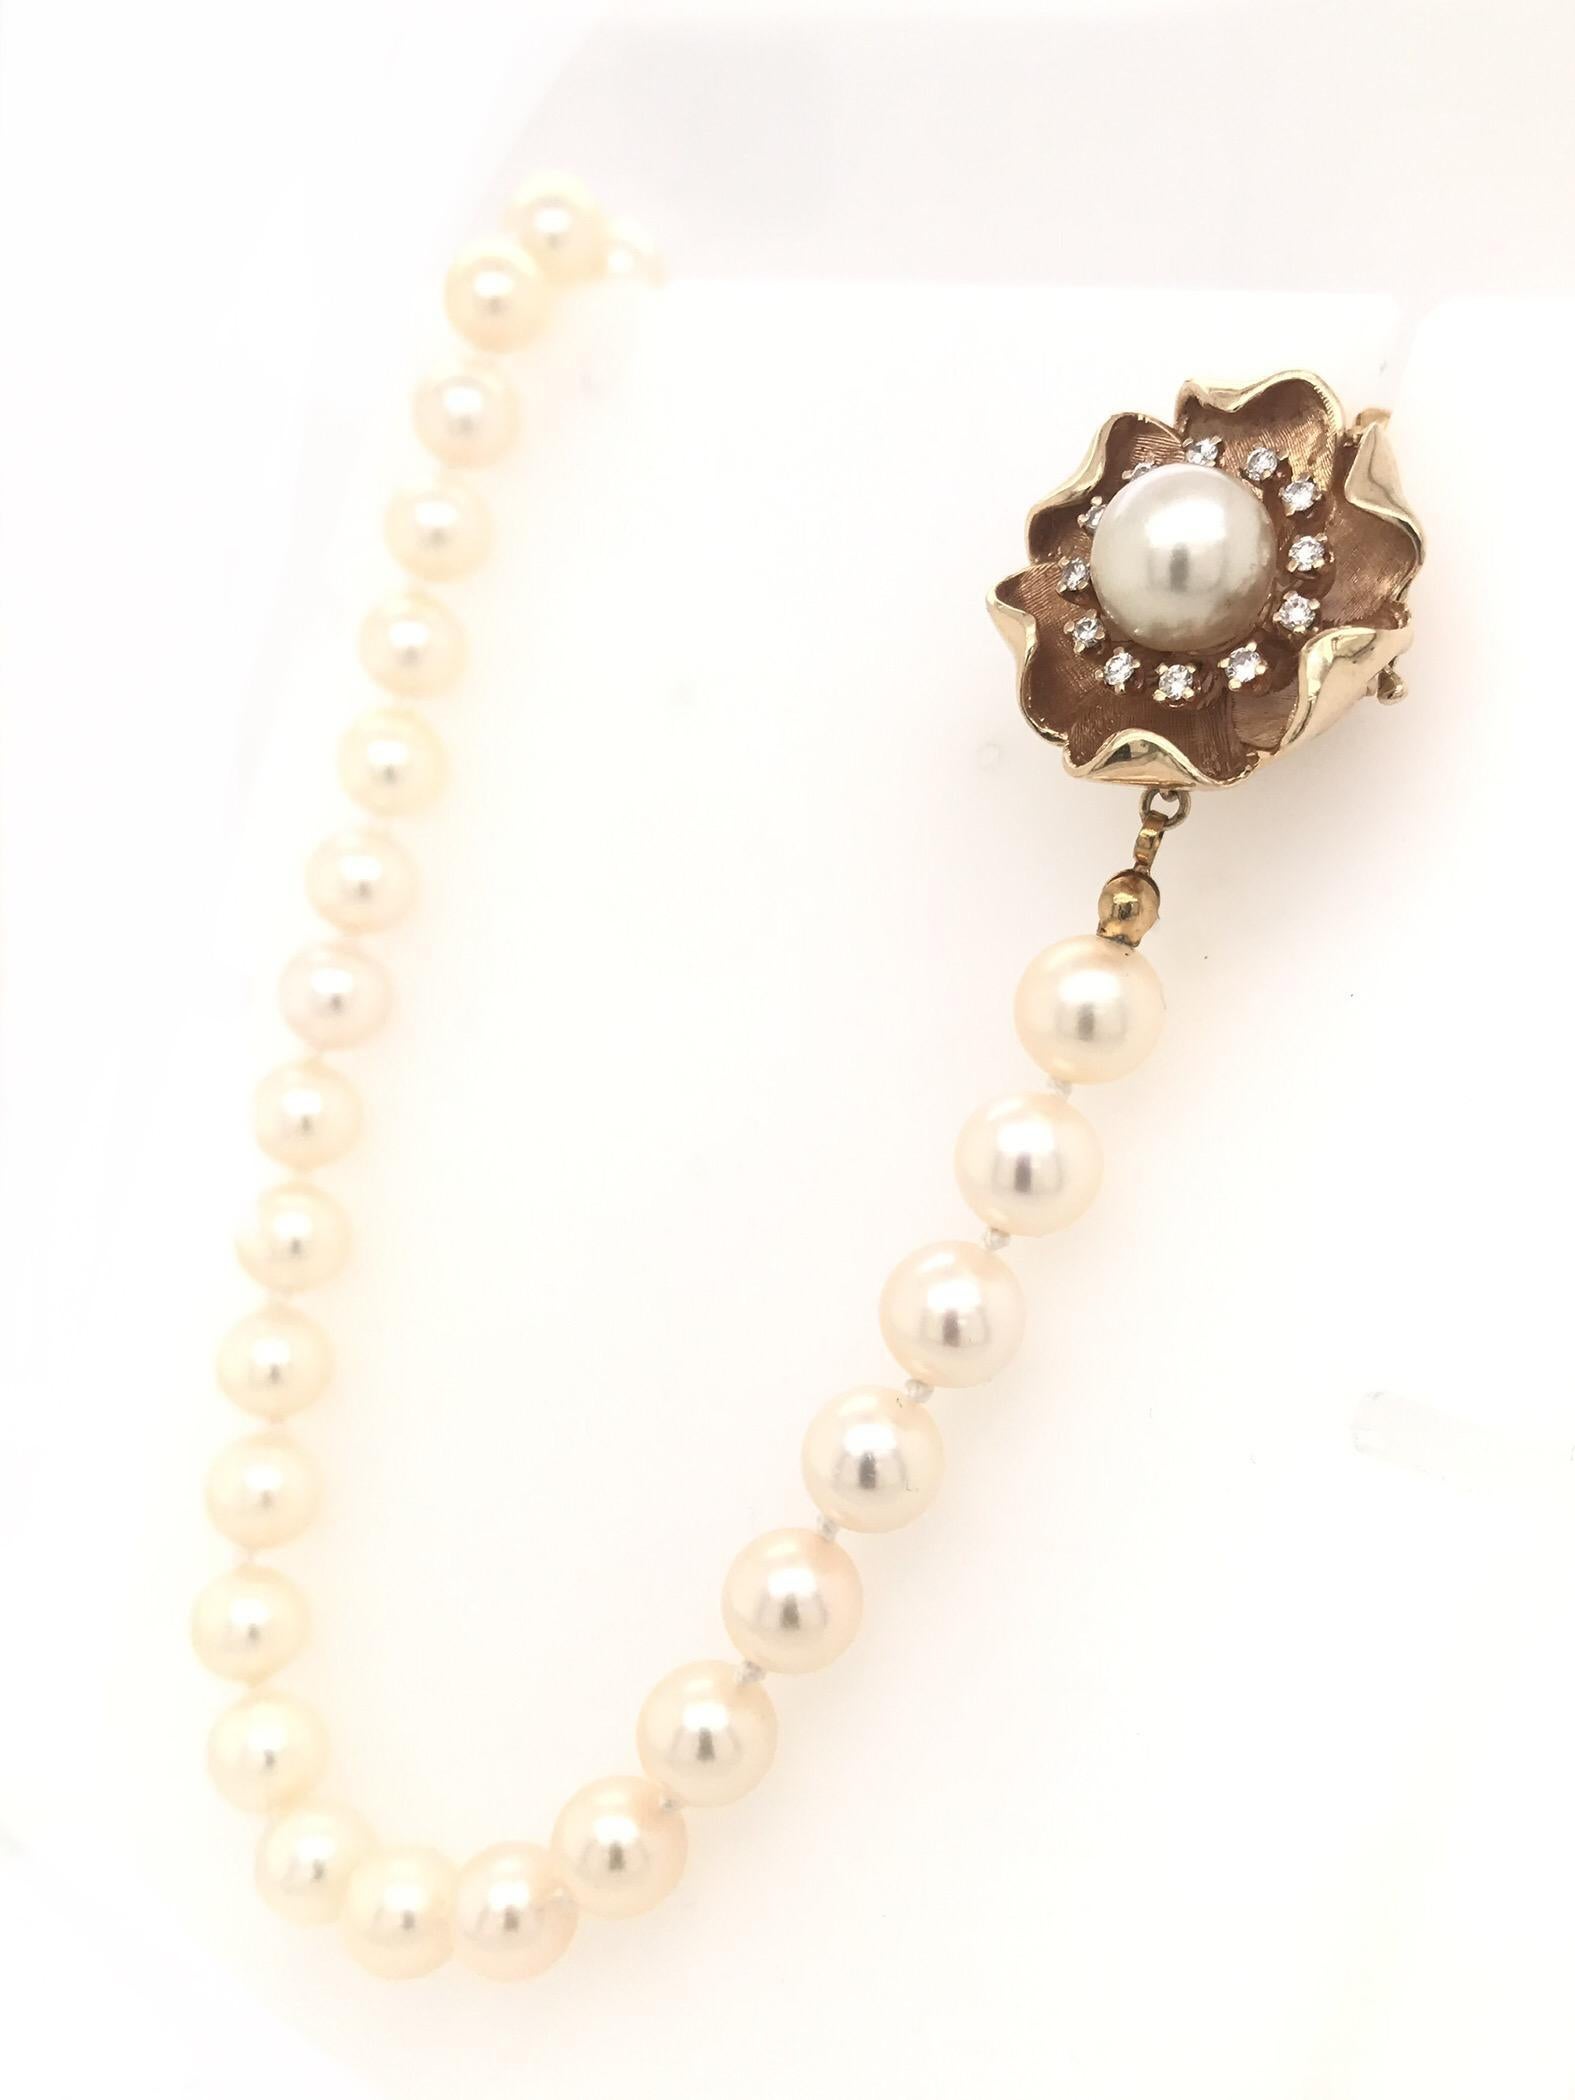 Retro Vintage Mid Century 7.5 Mm Pearl Necklace With Floral Diamond Clasp For Sale